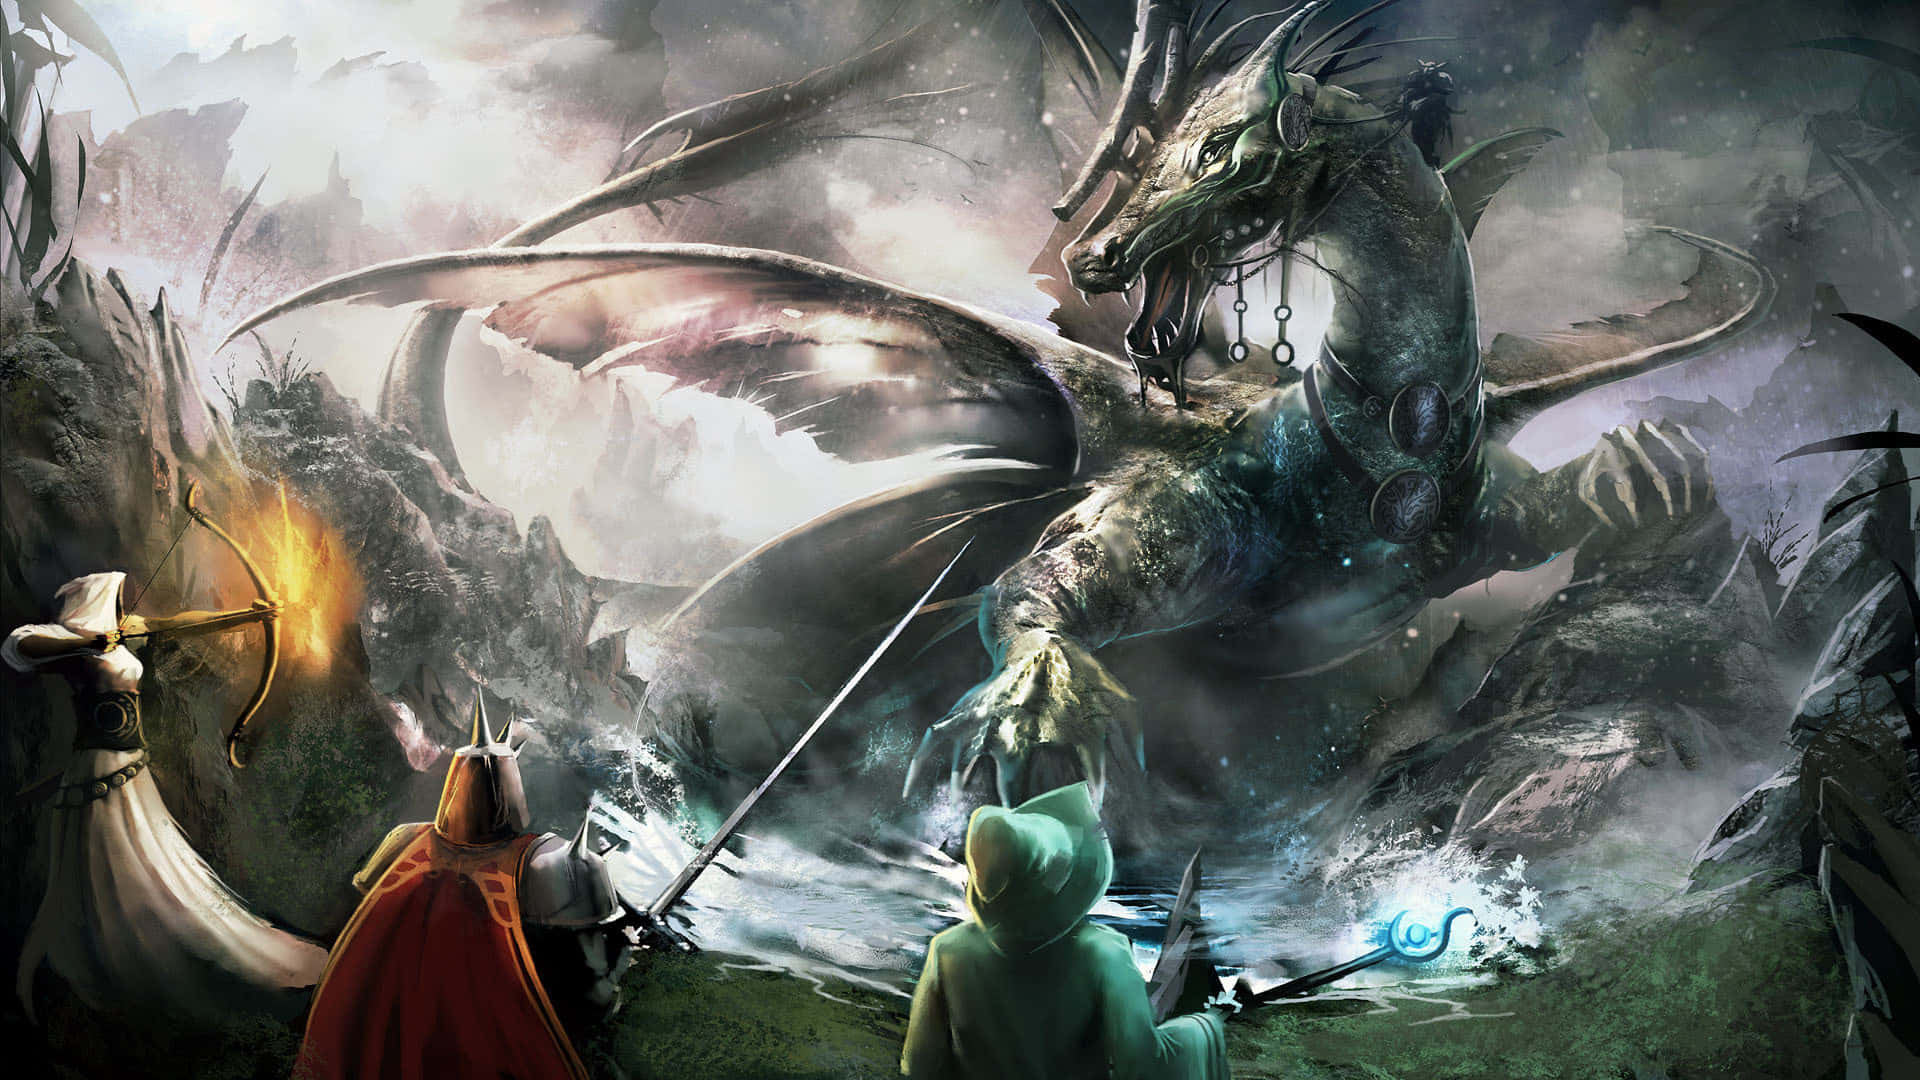 A Fierce Battle Between a Giant and a Dragon in an Epic Anime Scene Wallpaper